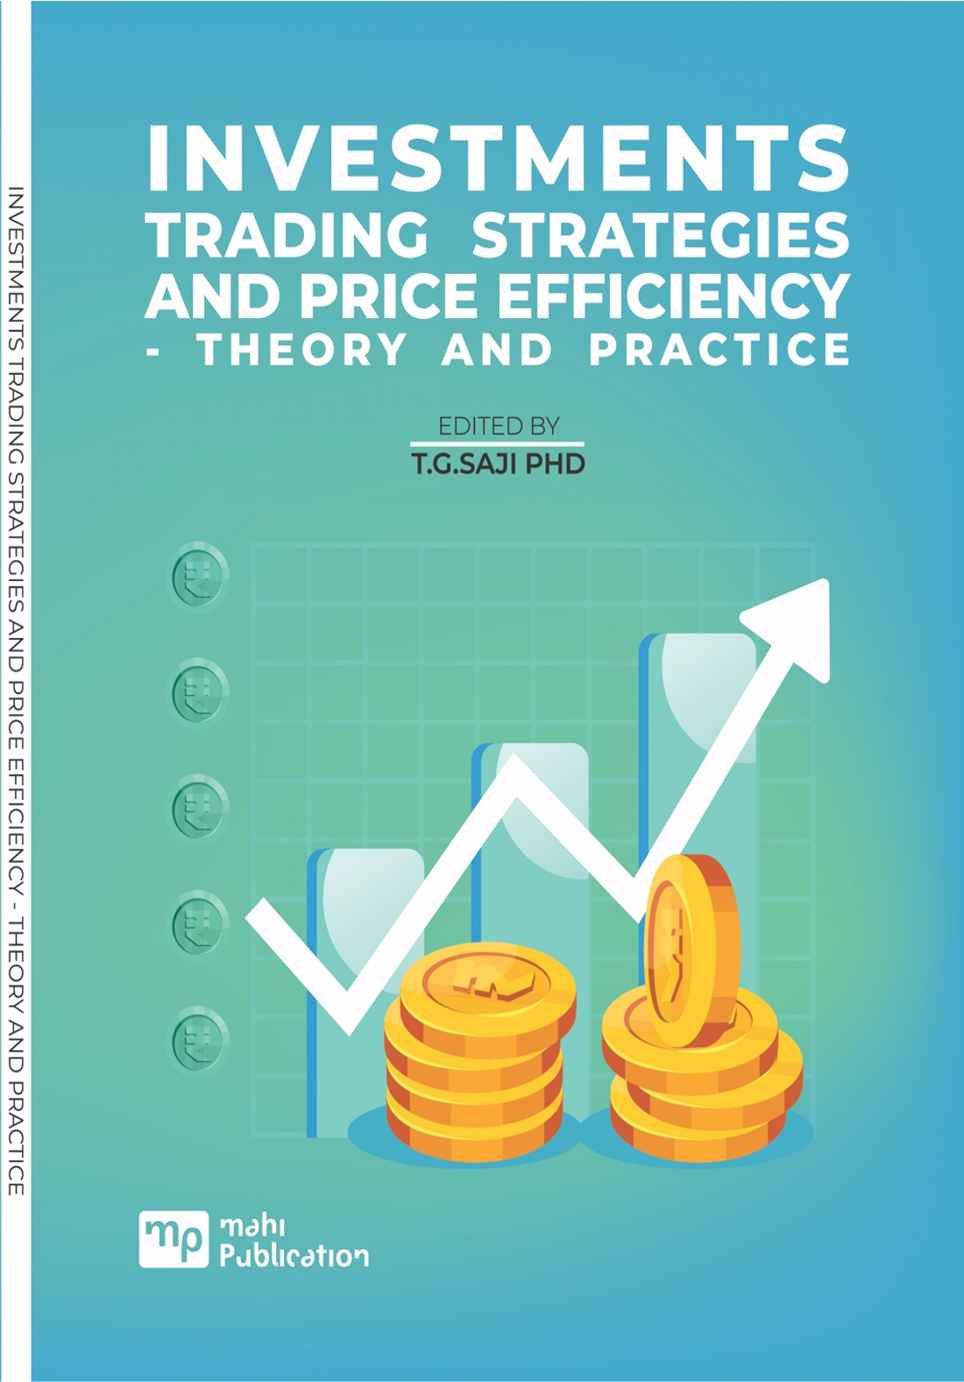  Investments Trading Strategies And Price Efficiency - Theory And Practice